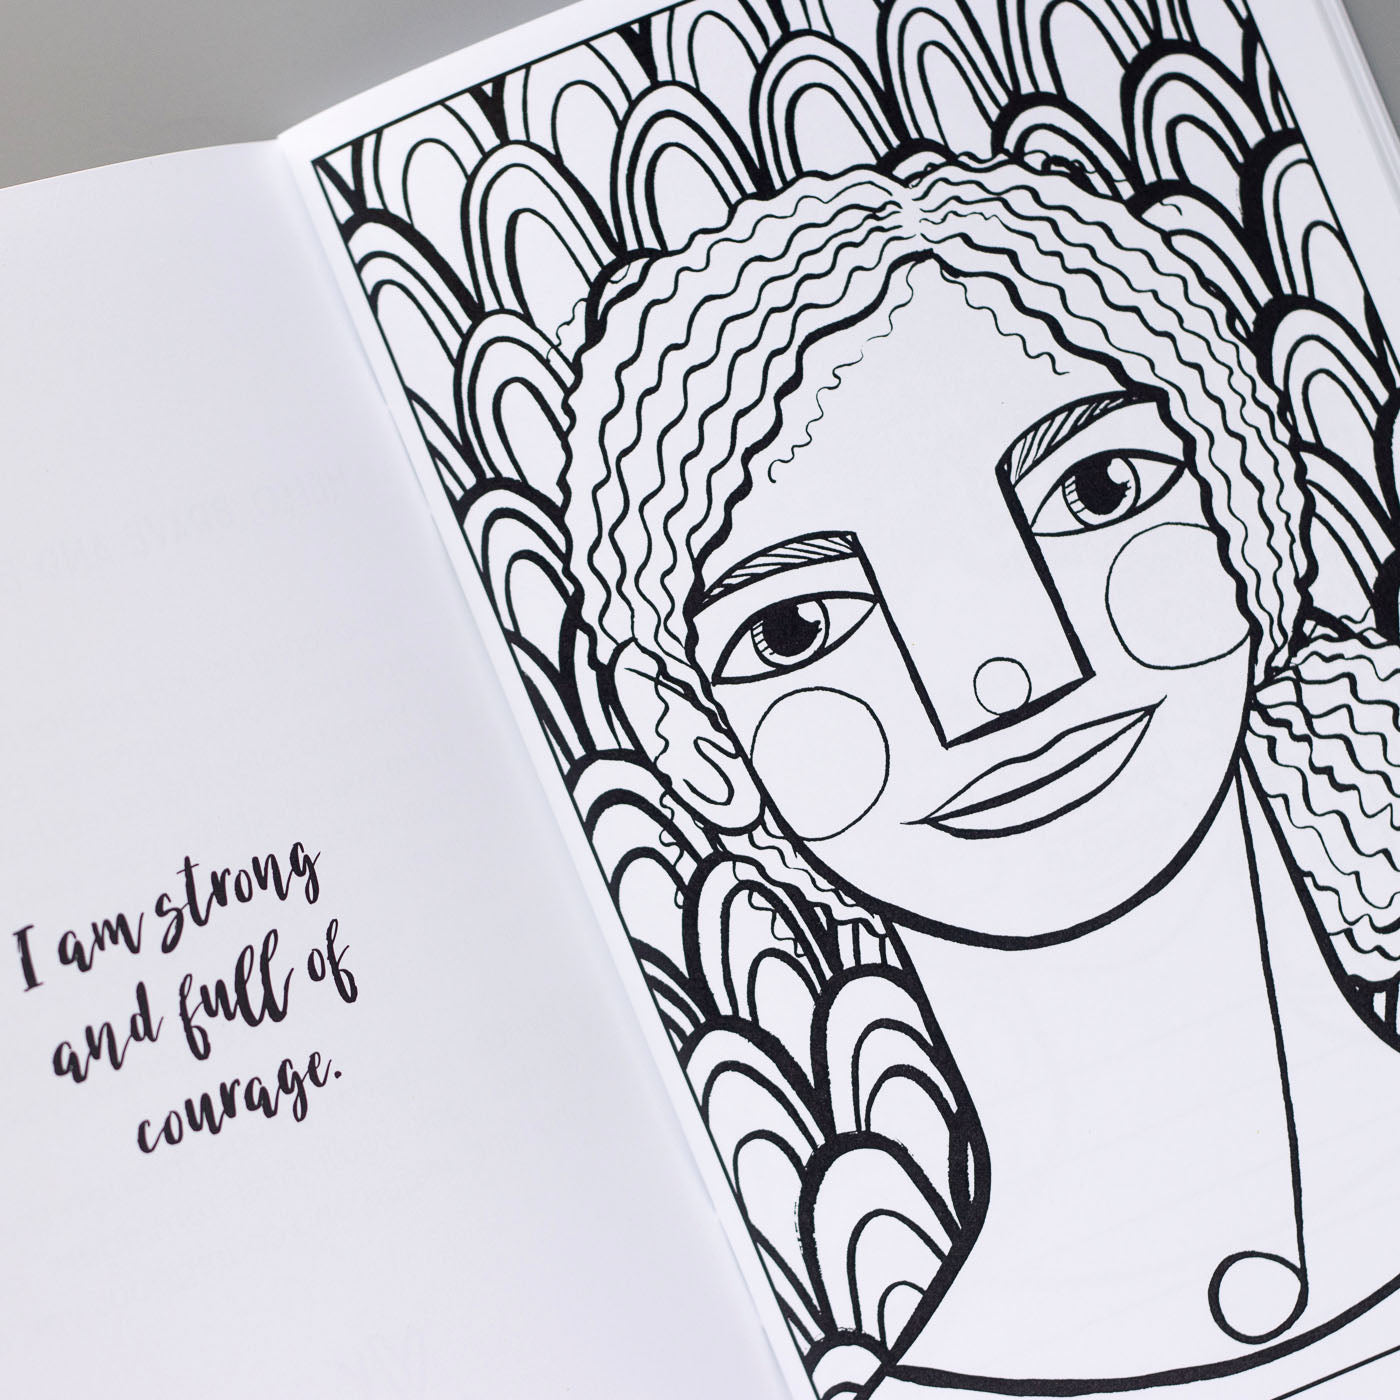 Coloring Workbook for Teen Girls | Courageous Coloring Workbook